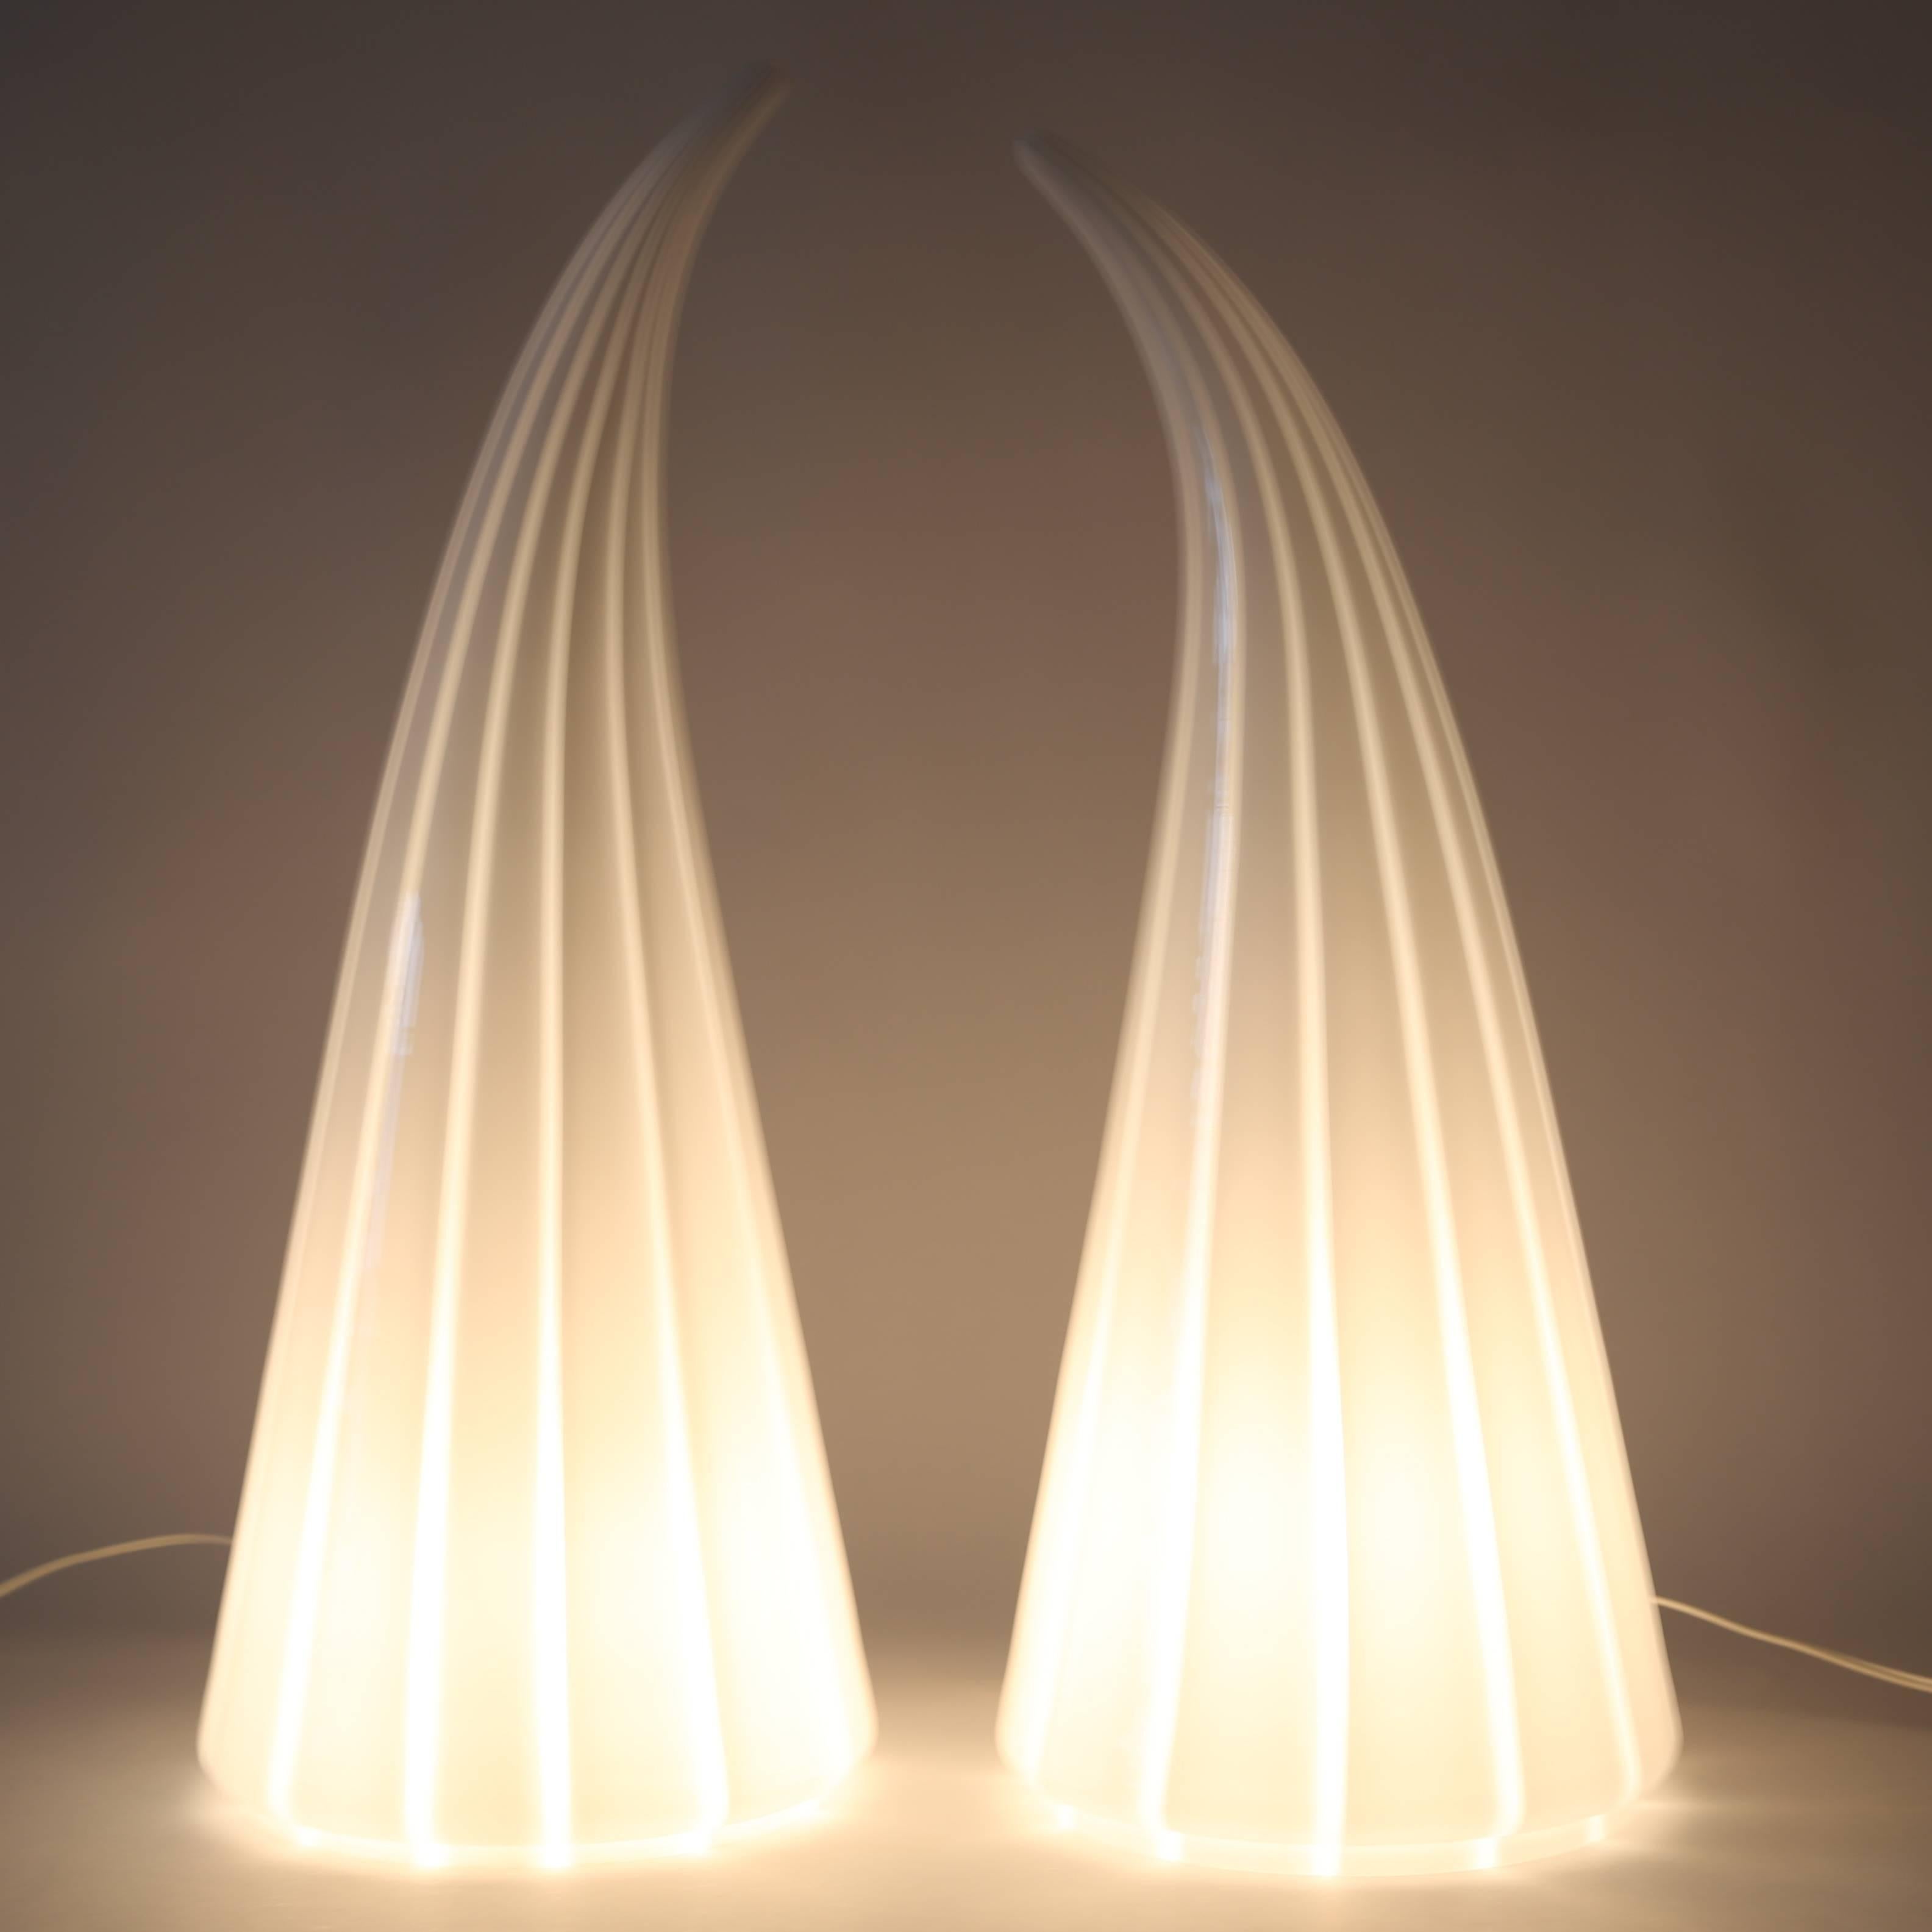 Pair of Vetri Murano Conical Table Lamps, Circa 1980s (Ende des 20. Jahrhunderts) im Angebot